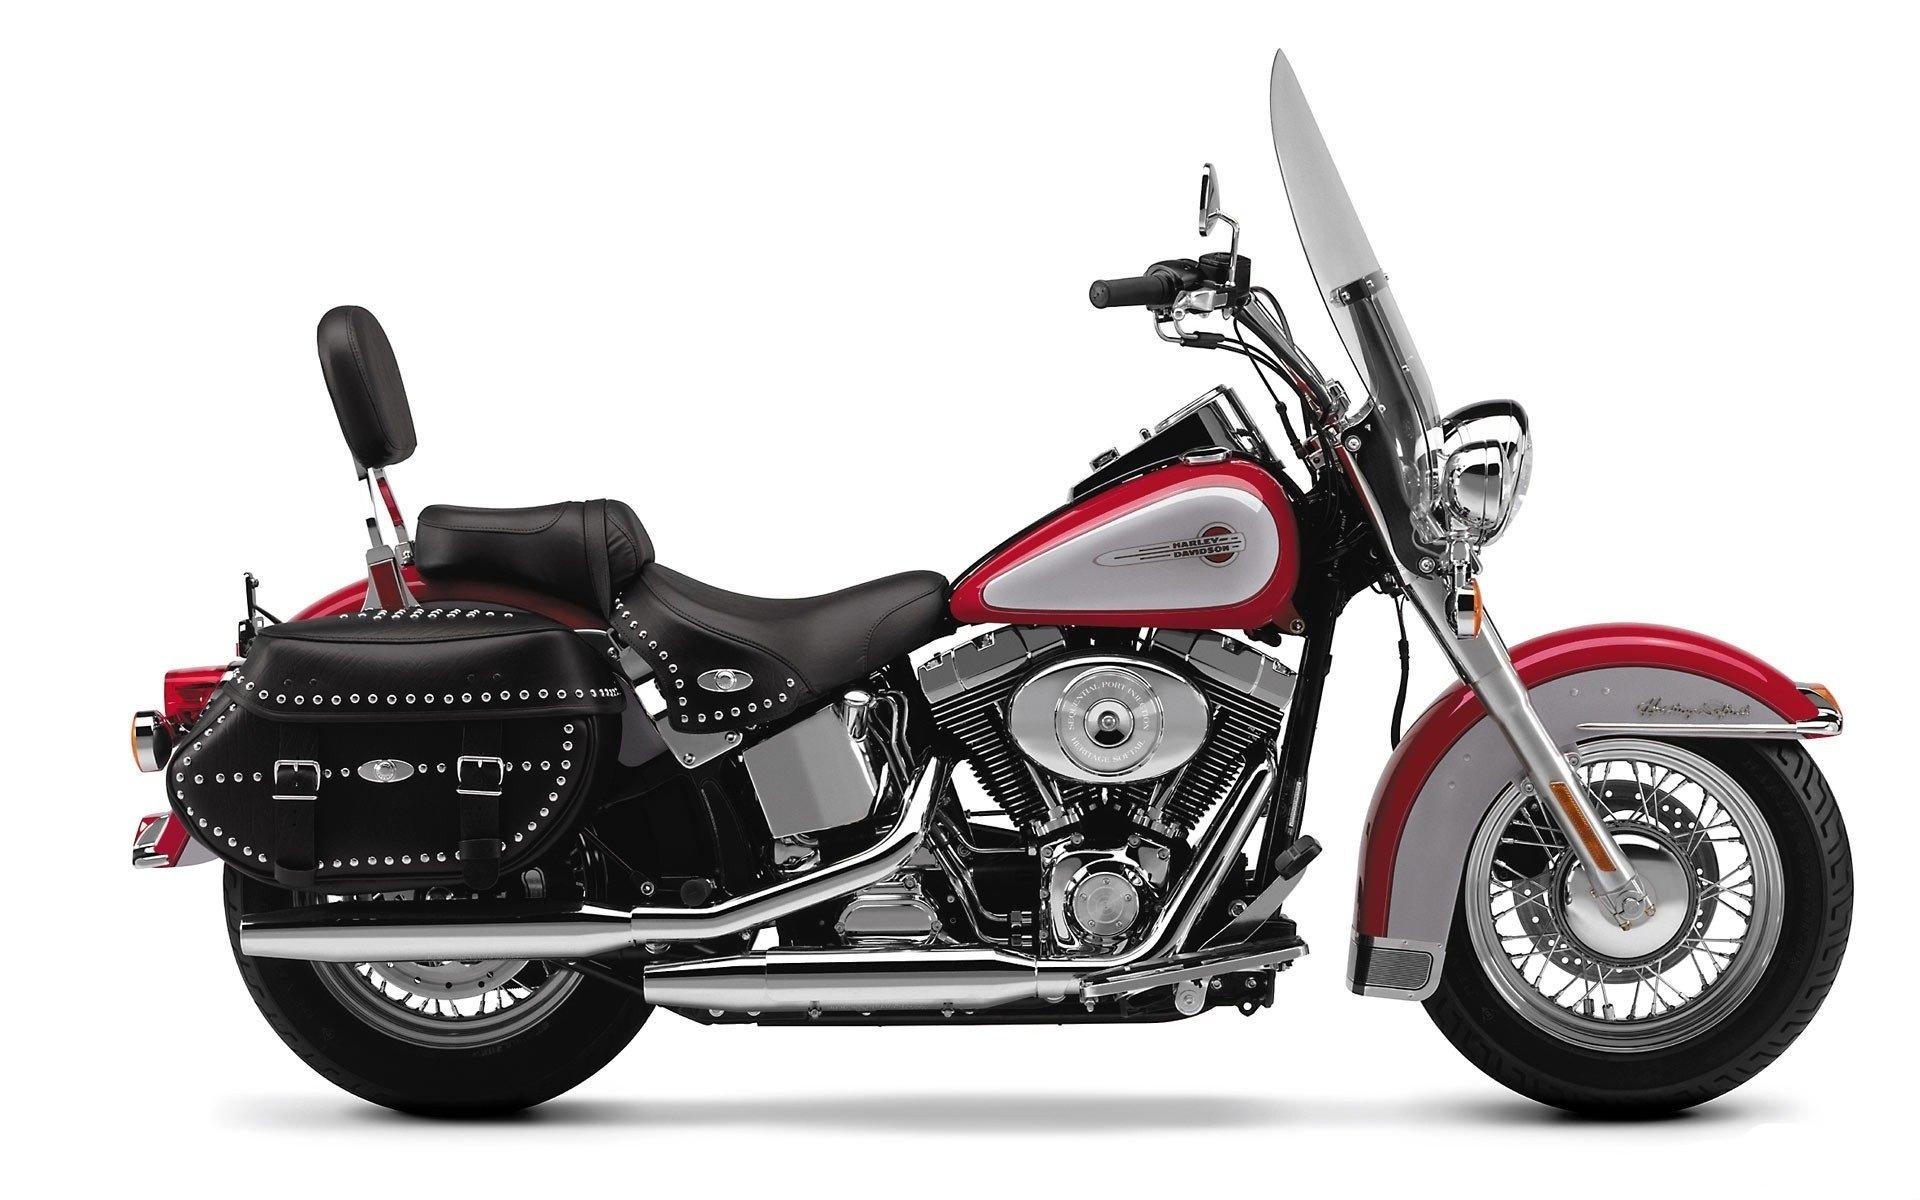 Harley Davidson Heritage Softail Hd Wallpapers Background Images